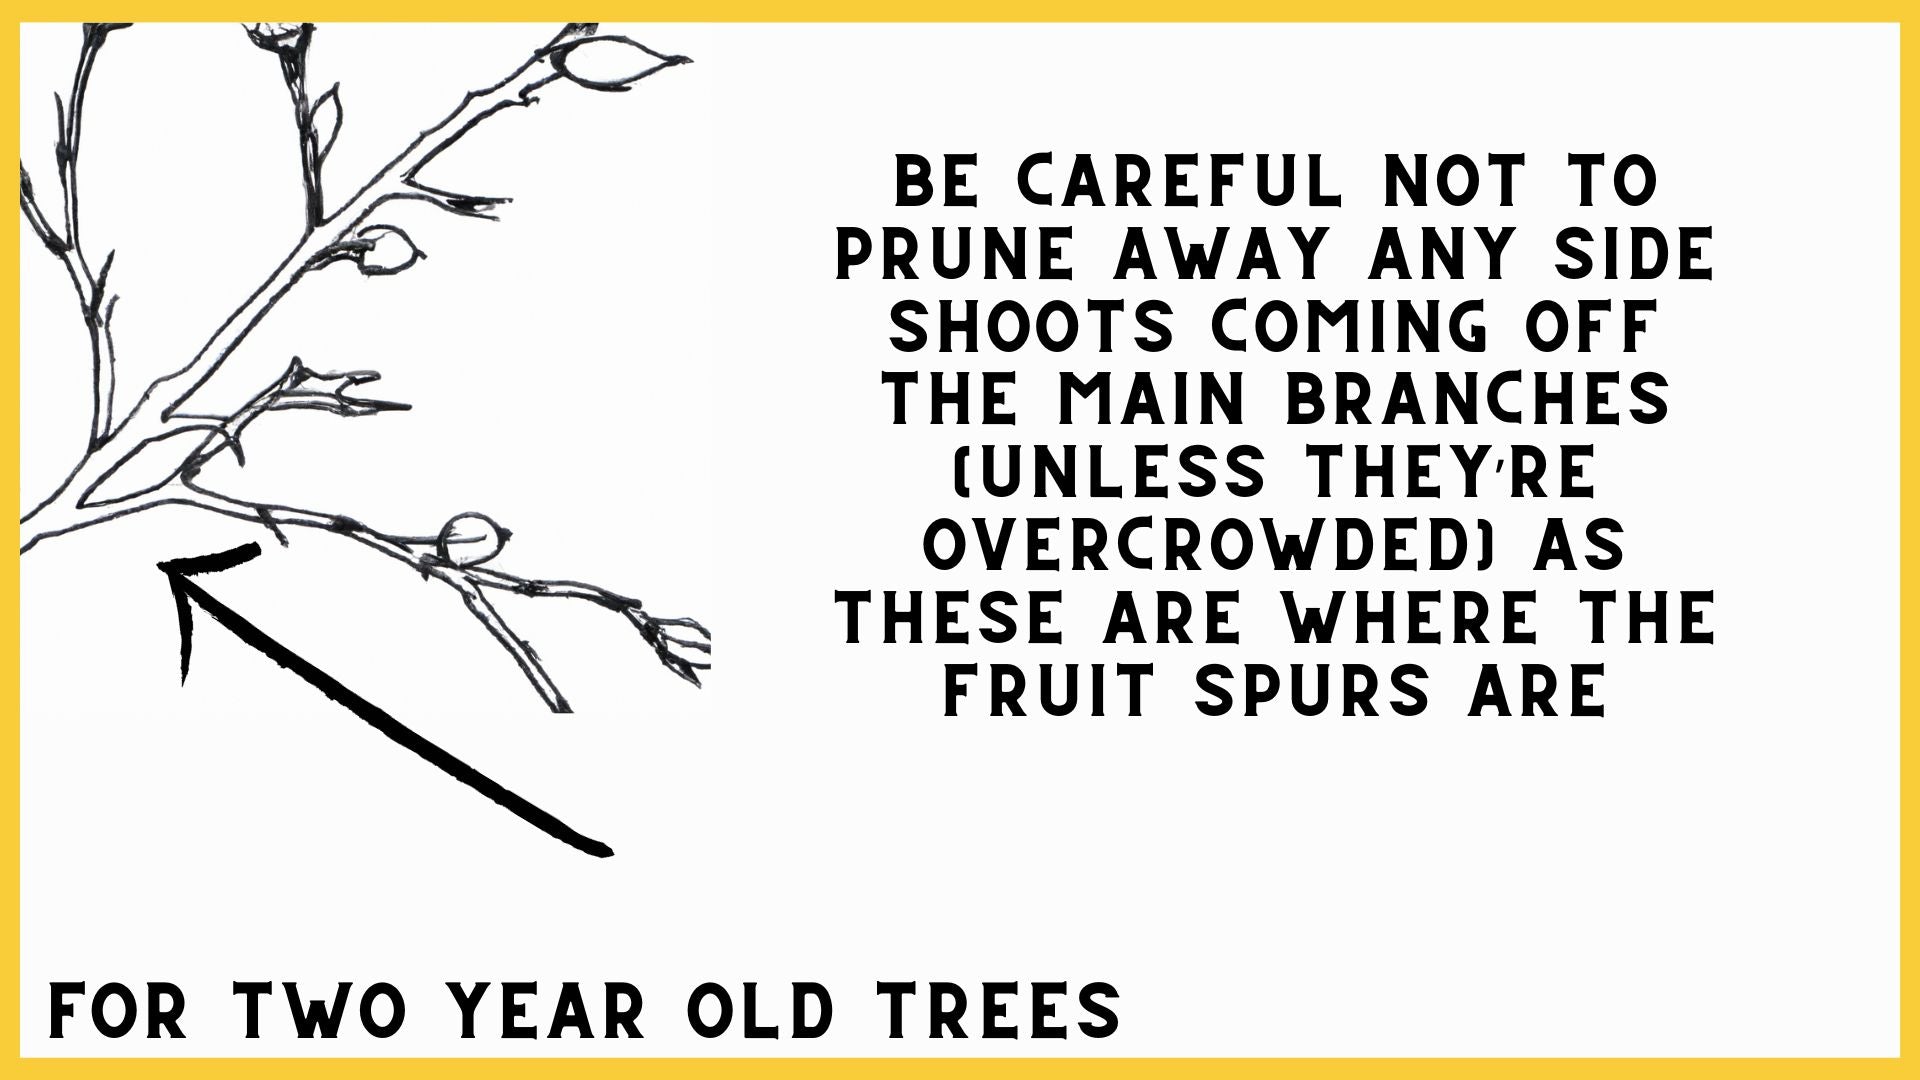 be careful pruning side shoots